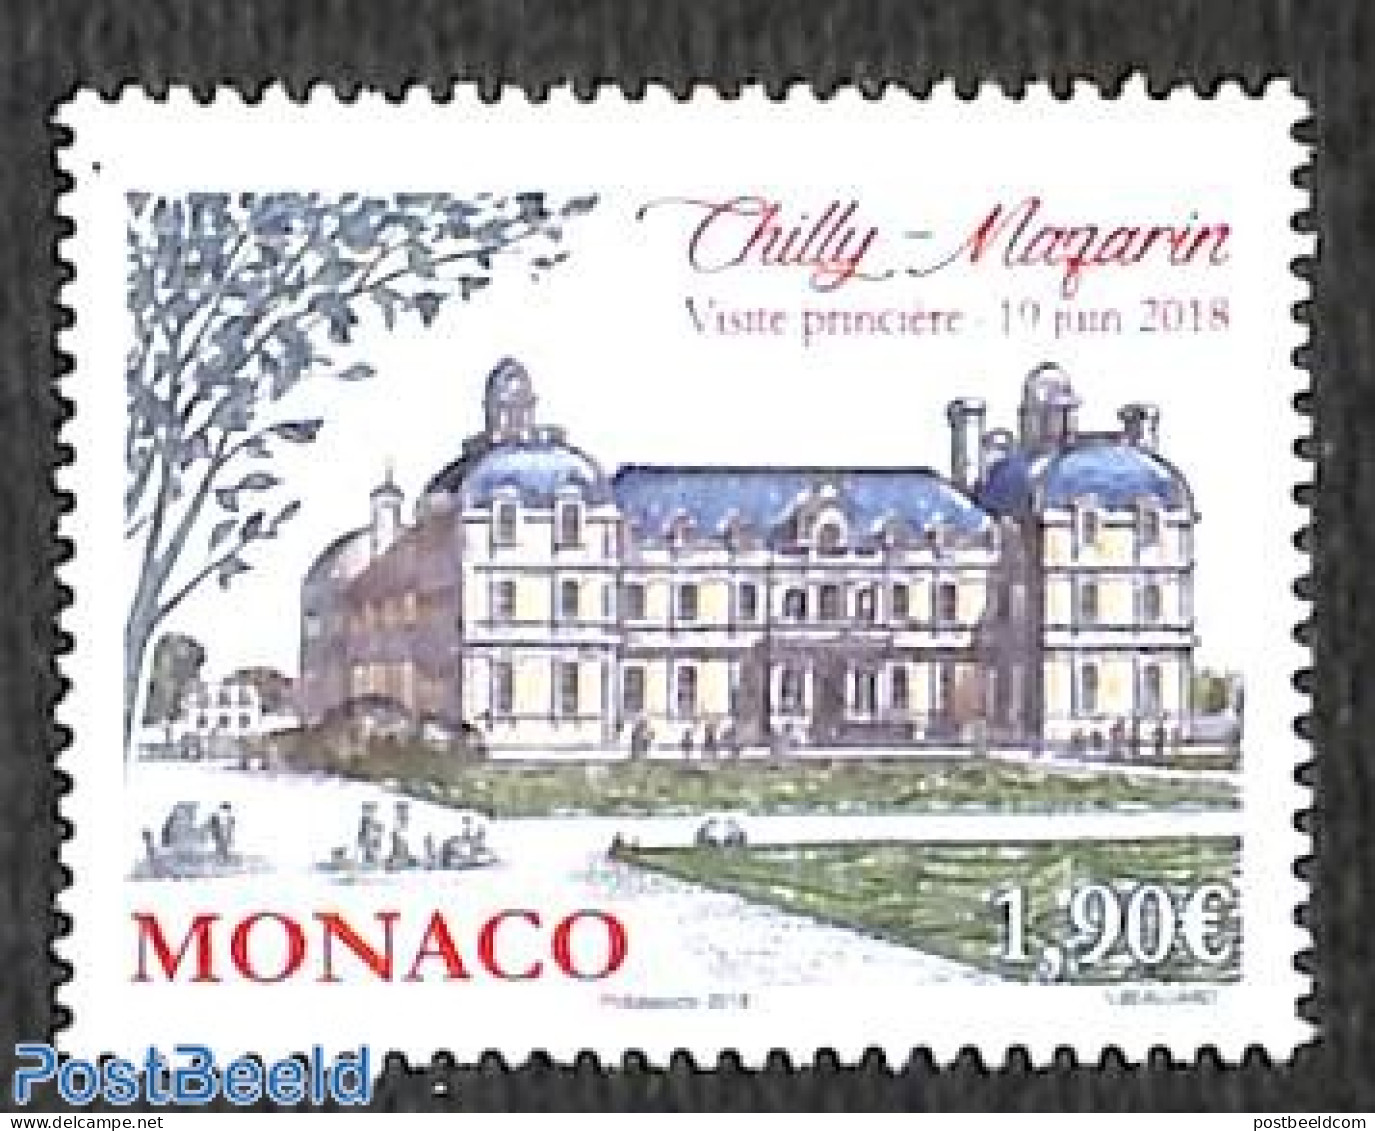 Monaco 2018 Chilly Mazarin 1v, Mint NH, Art - Castles & Fortifications - Unused Stamps